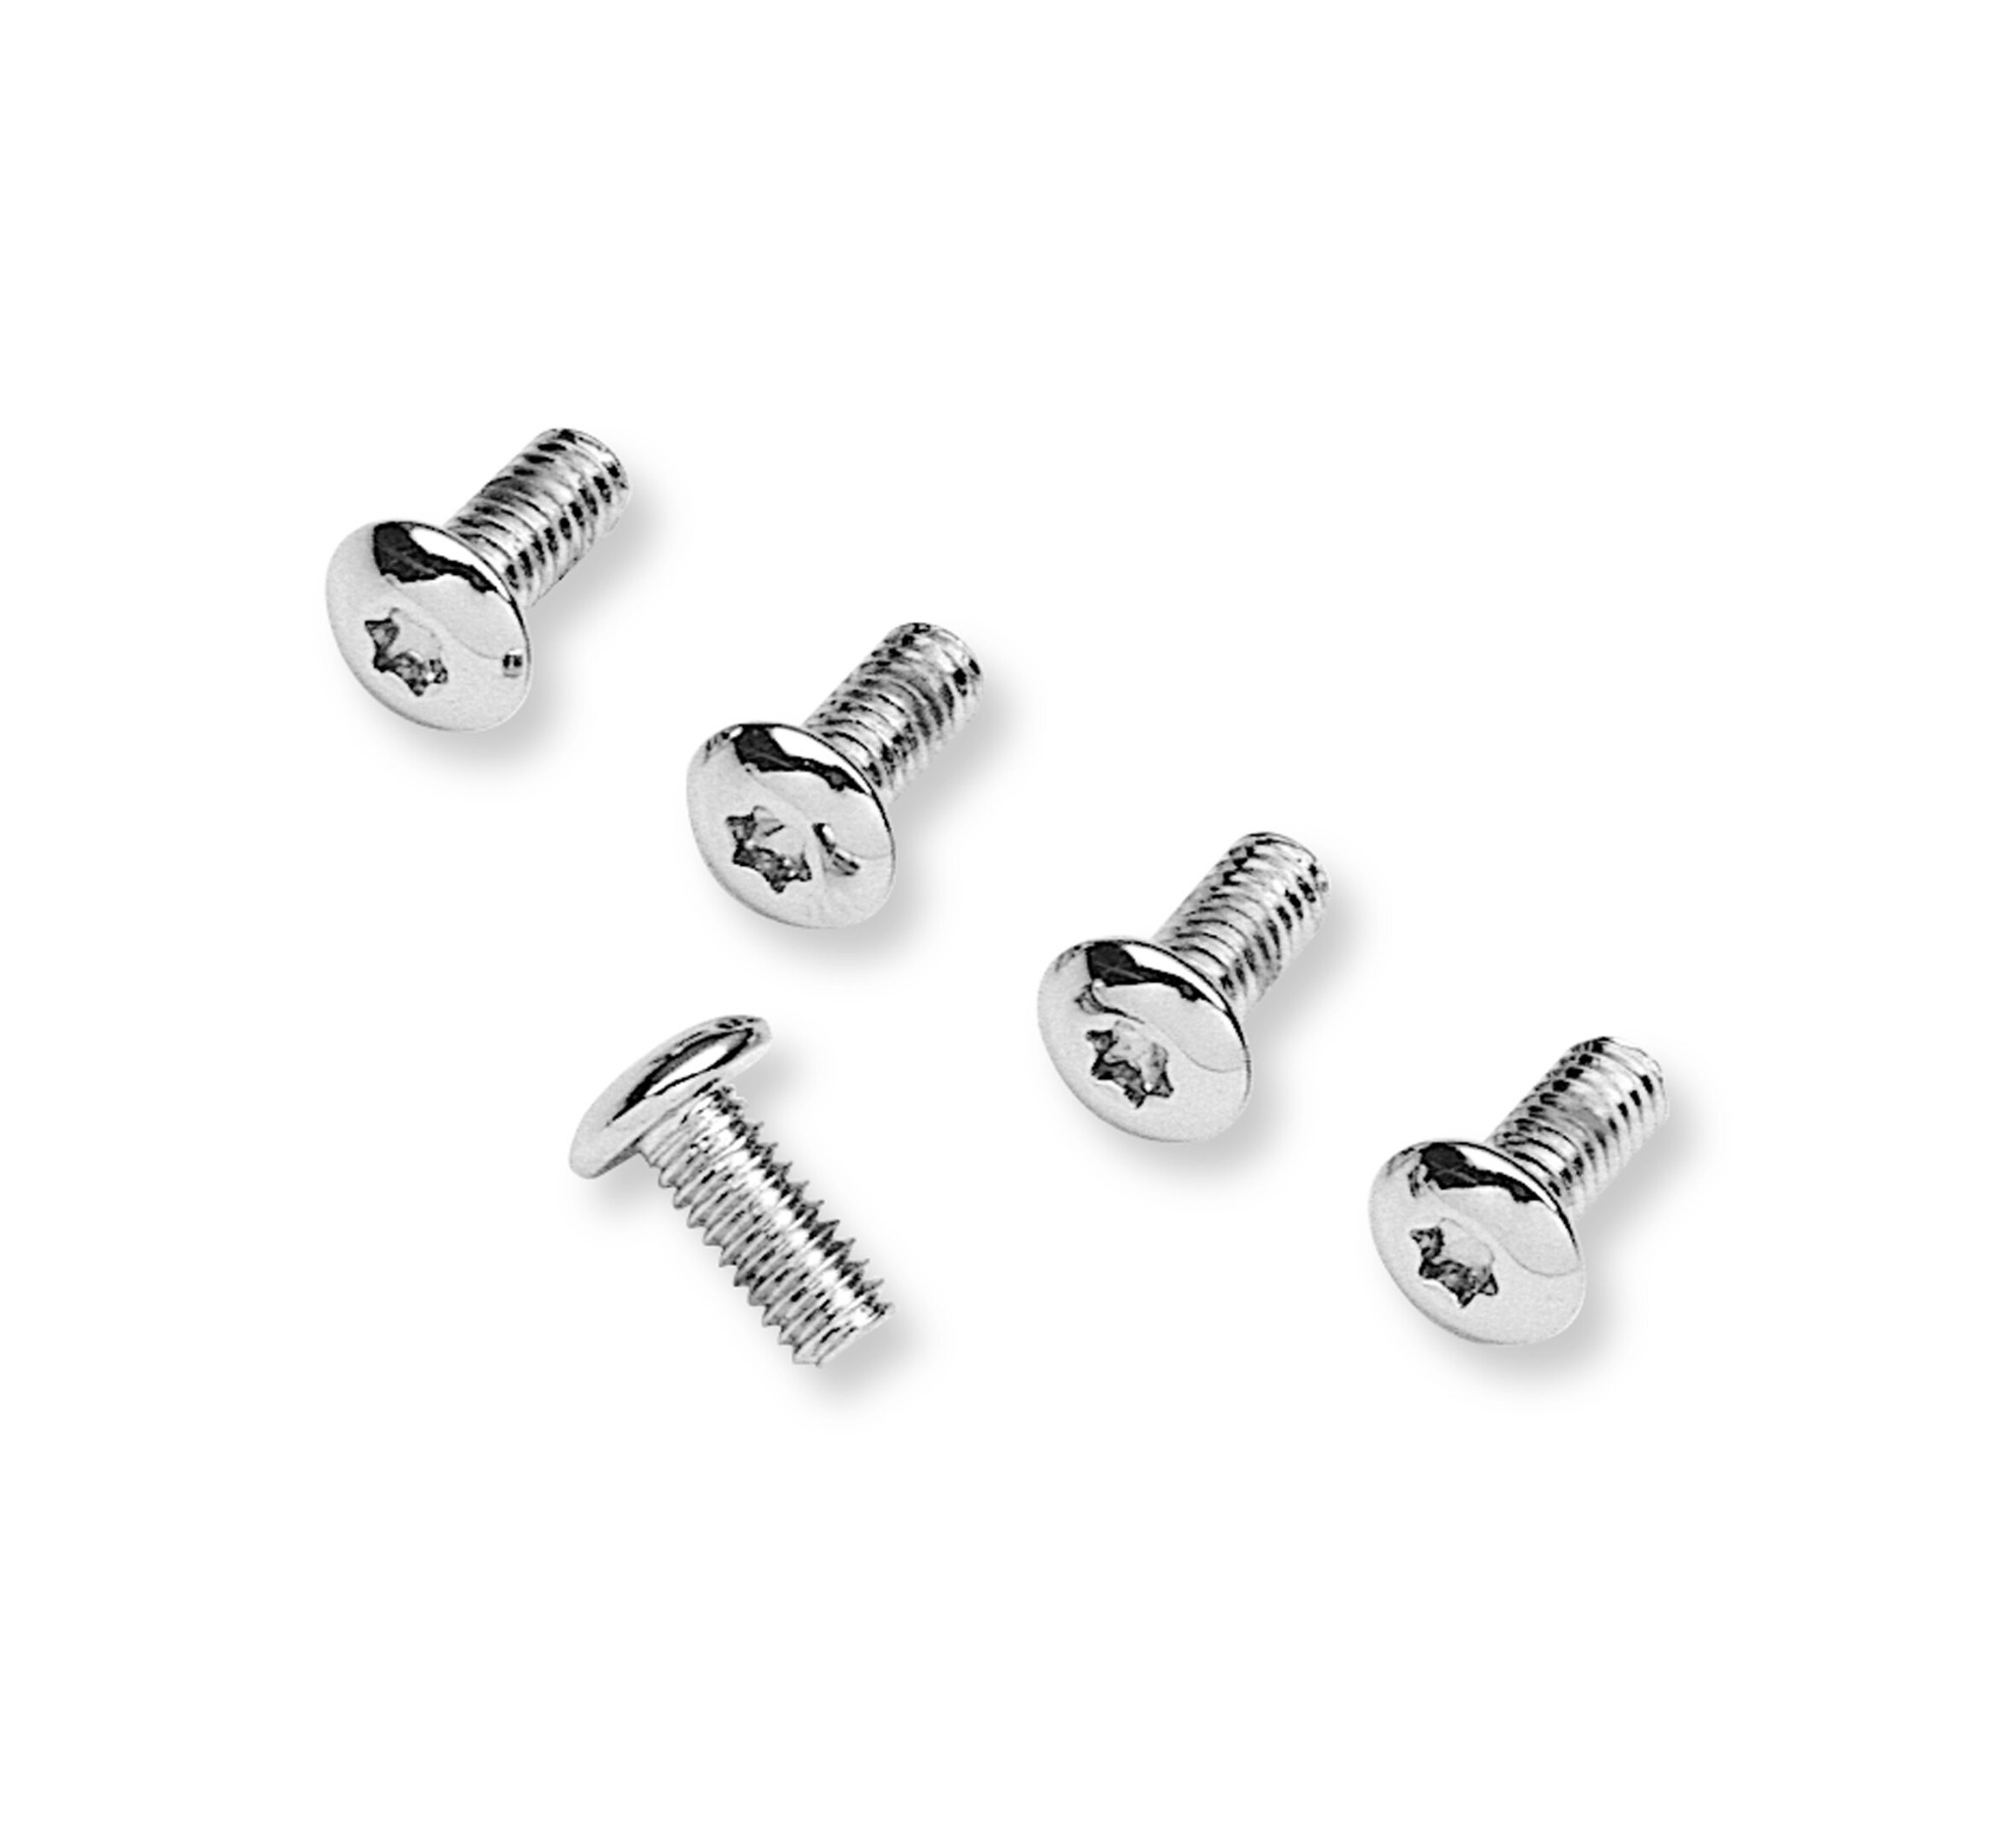 Stainless Ignition Timing Cover Screws for Harley Davidson Motorcycles 1980-1999